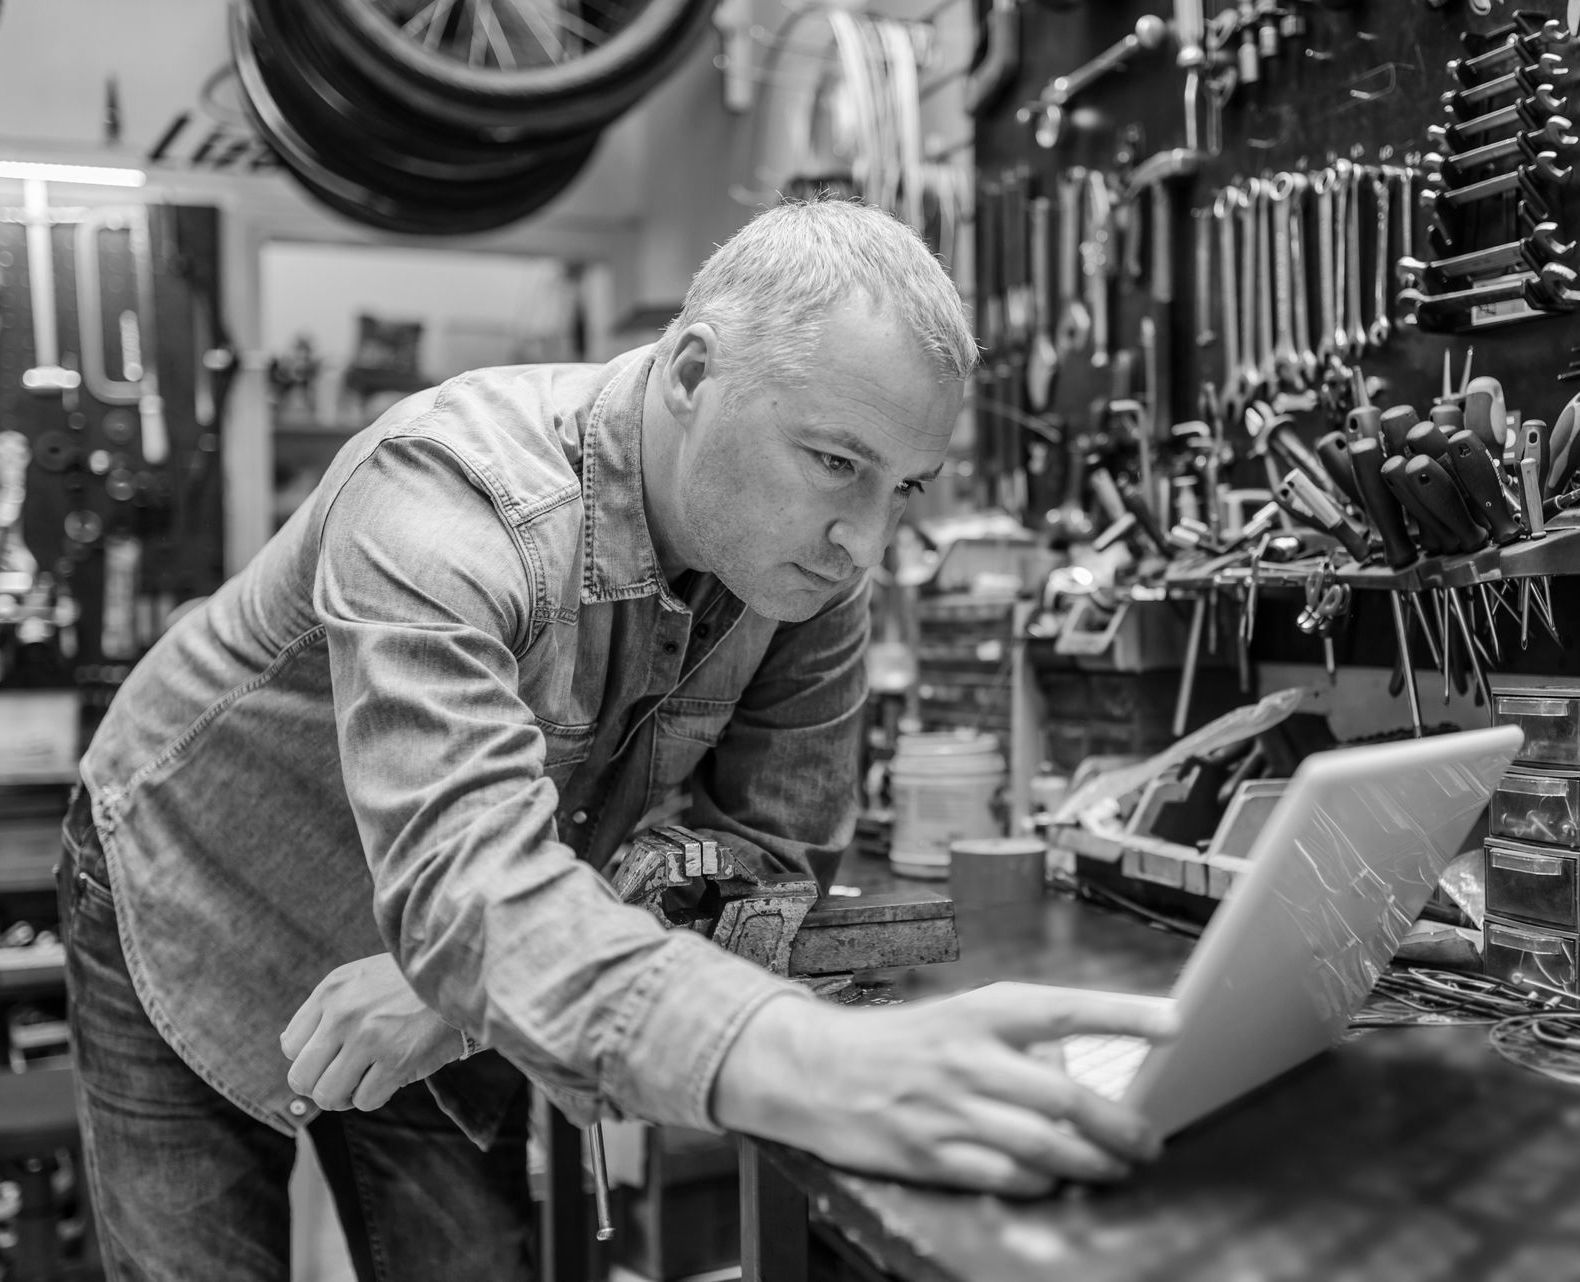 the bike shop owner working on a laptop, researching small business tech support options